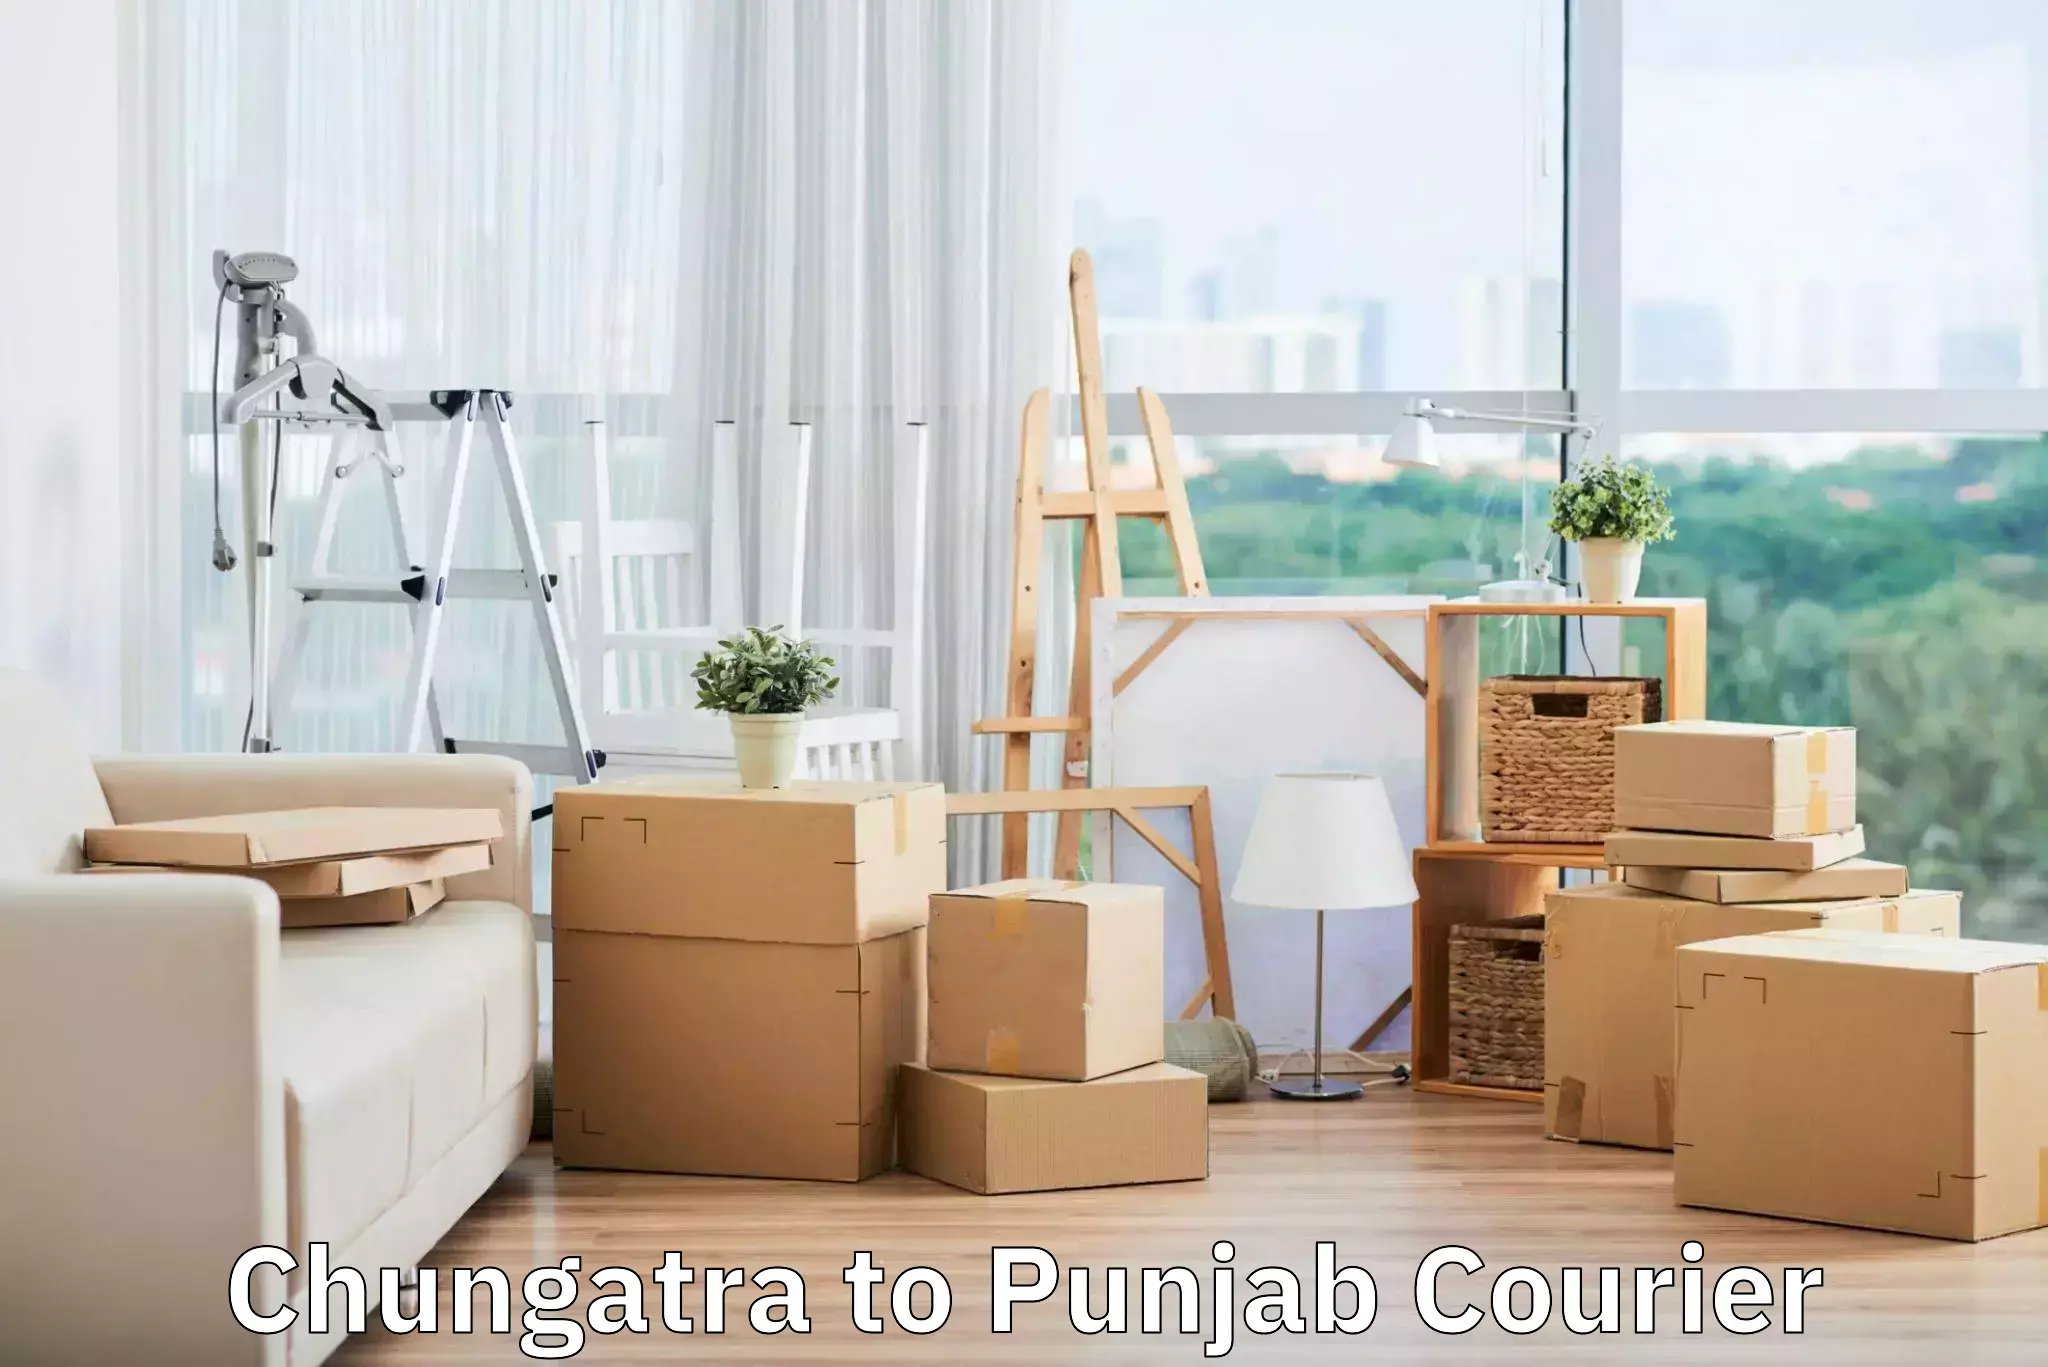 Online luggage shipping booking Chungatra to Ludhiana